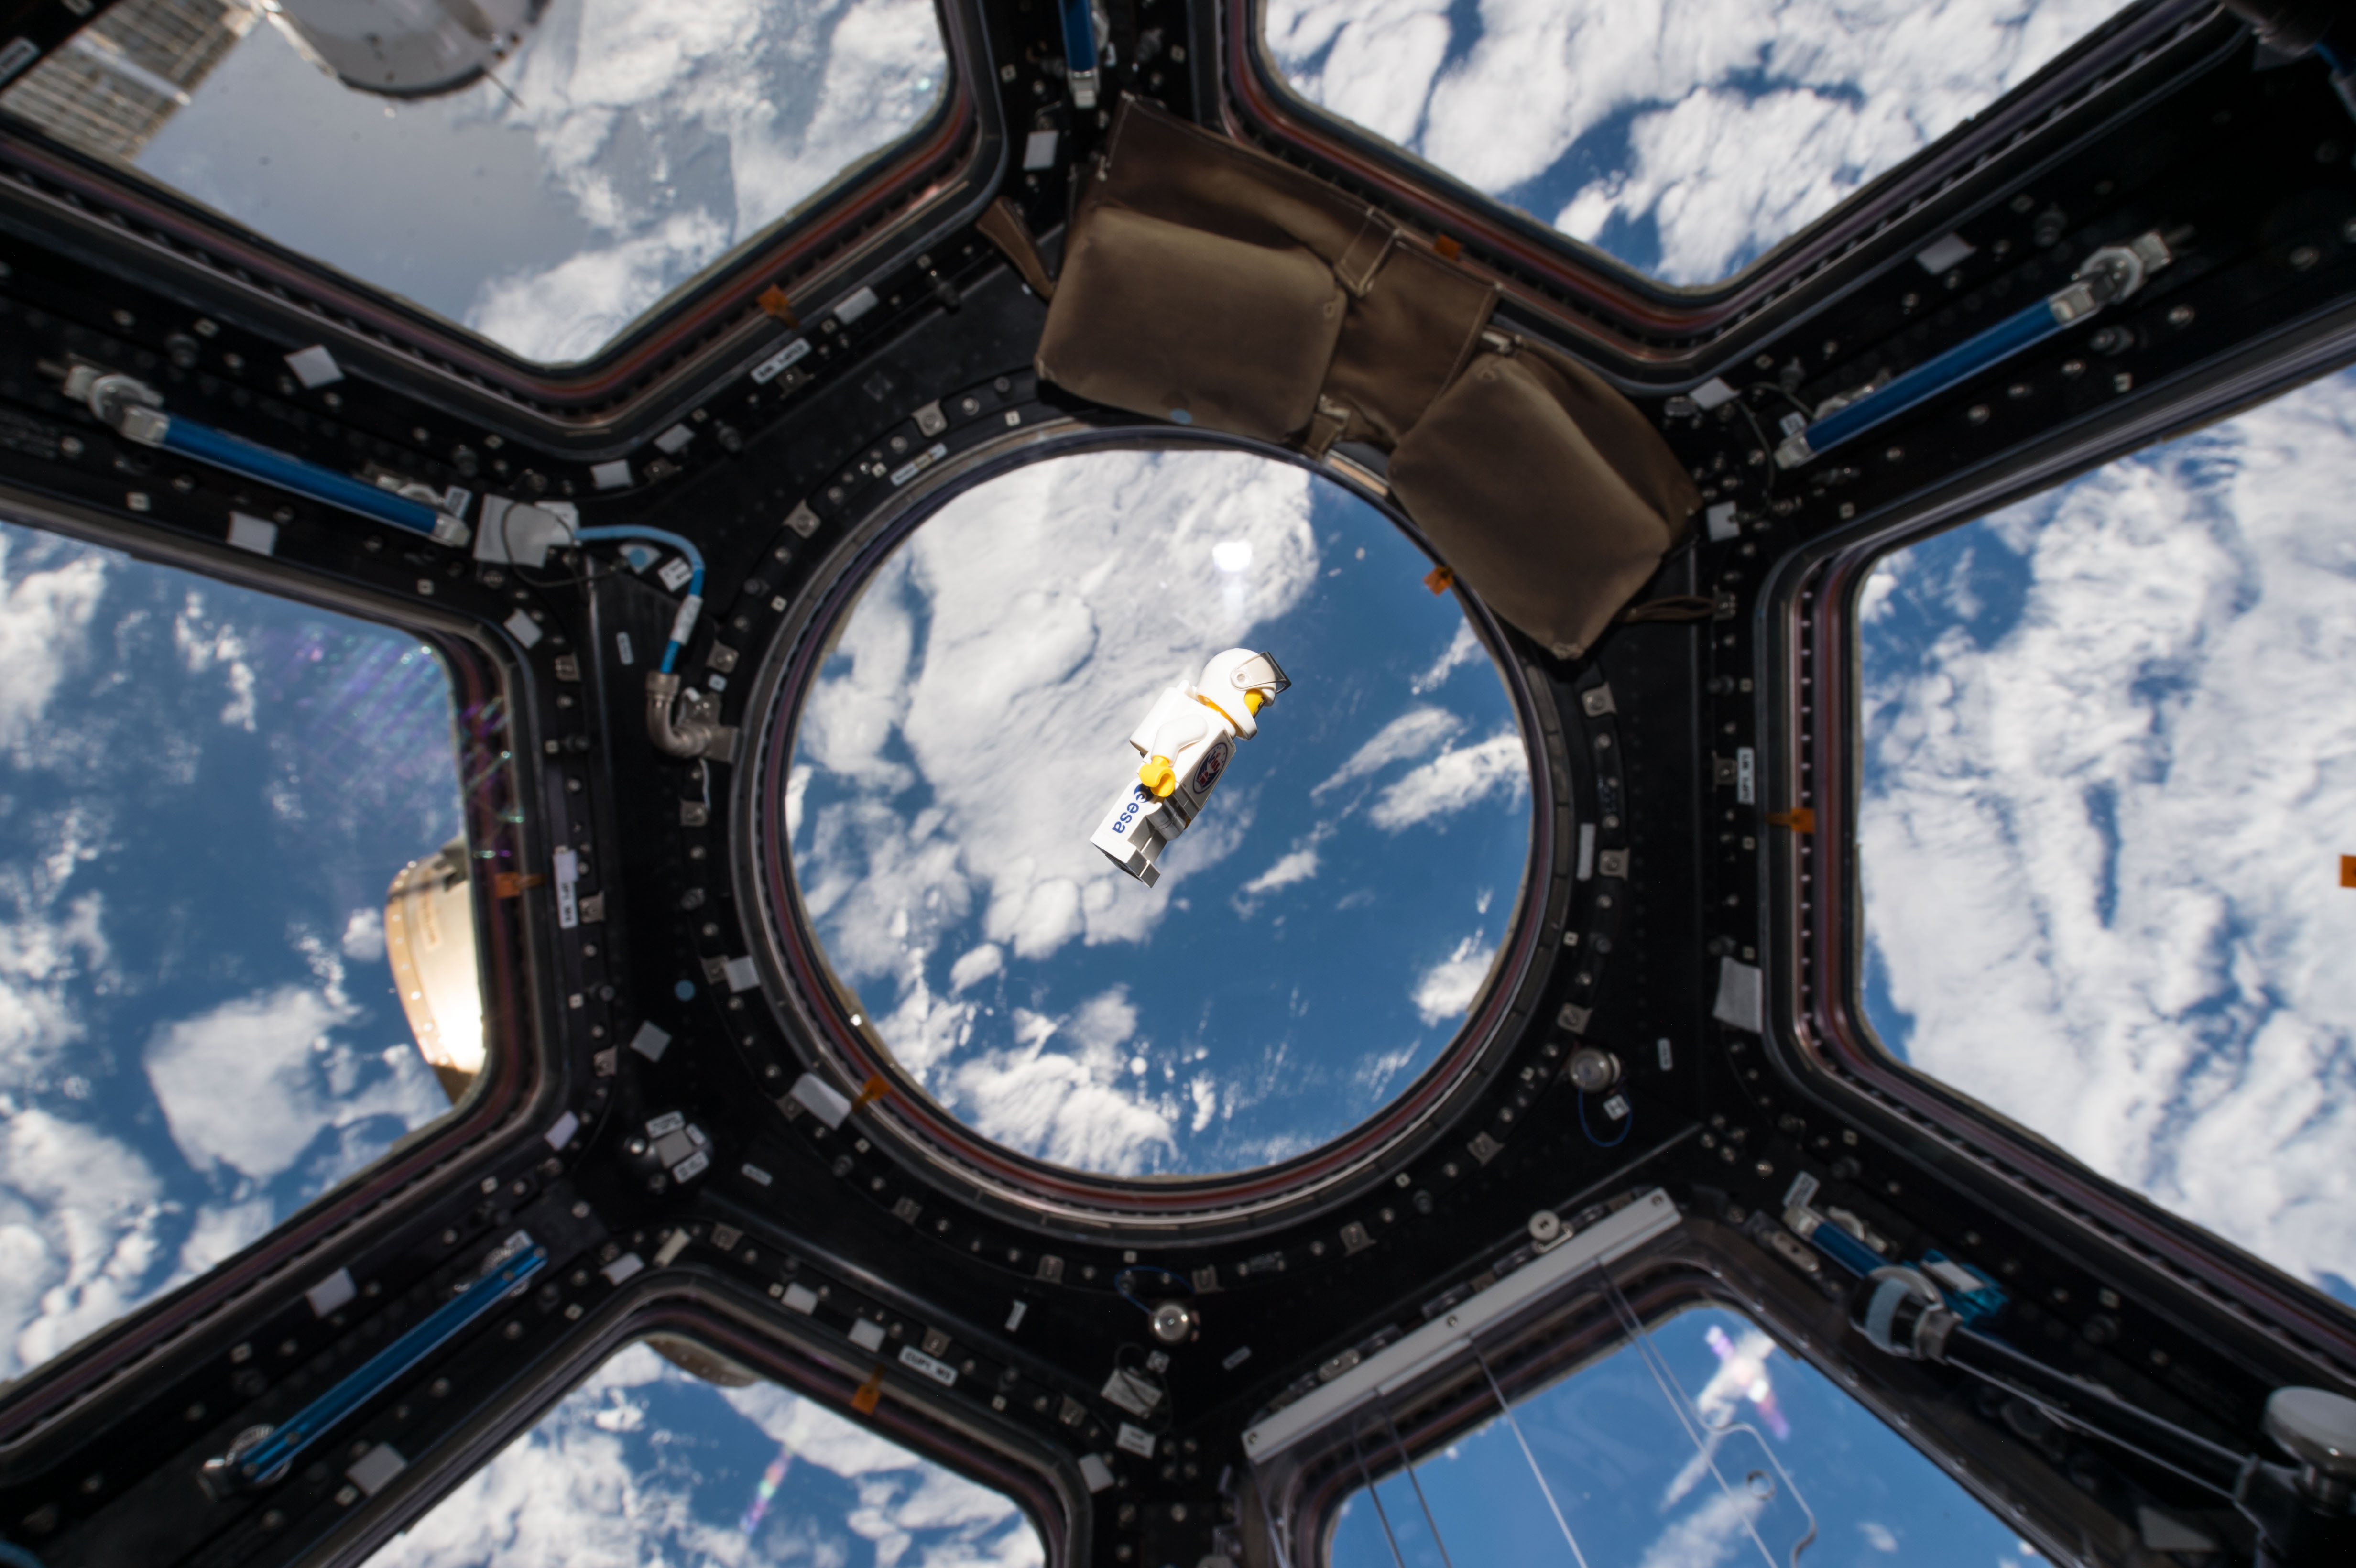 The story behind the LEGO astronauts | iriss mission blog